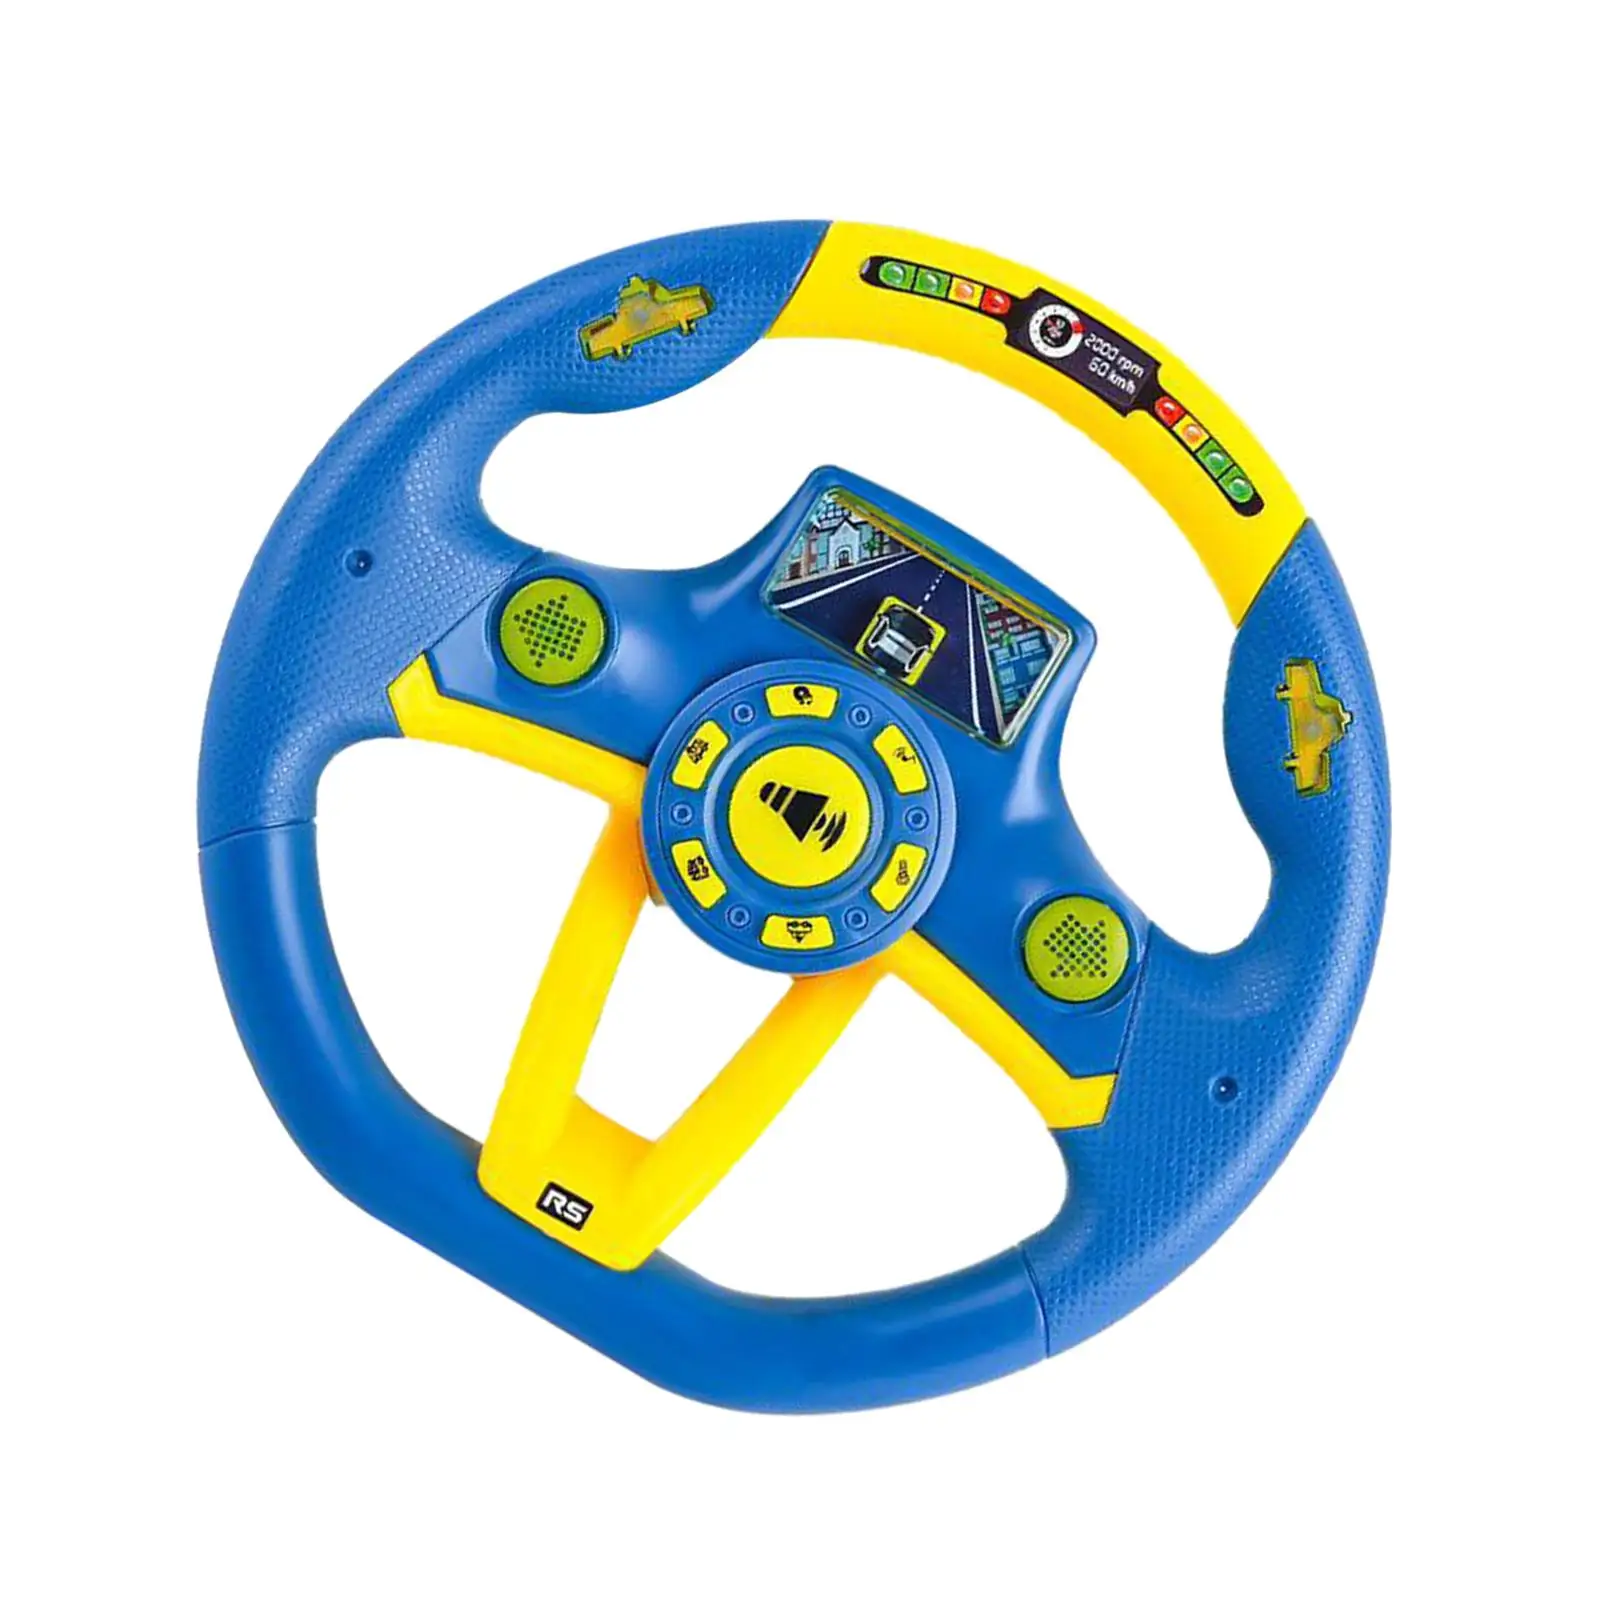 Simulated Steering Wheel Driving Busy Board DIY Accessory for Playground Climbing Frame Amusement Park Outdoor Birthday Gifts